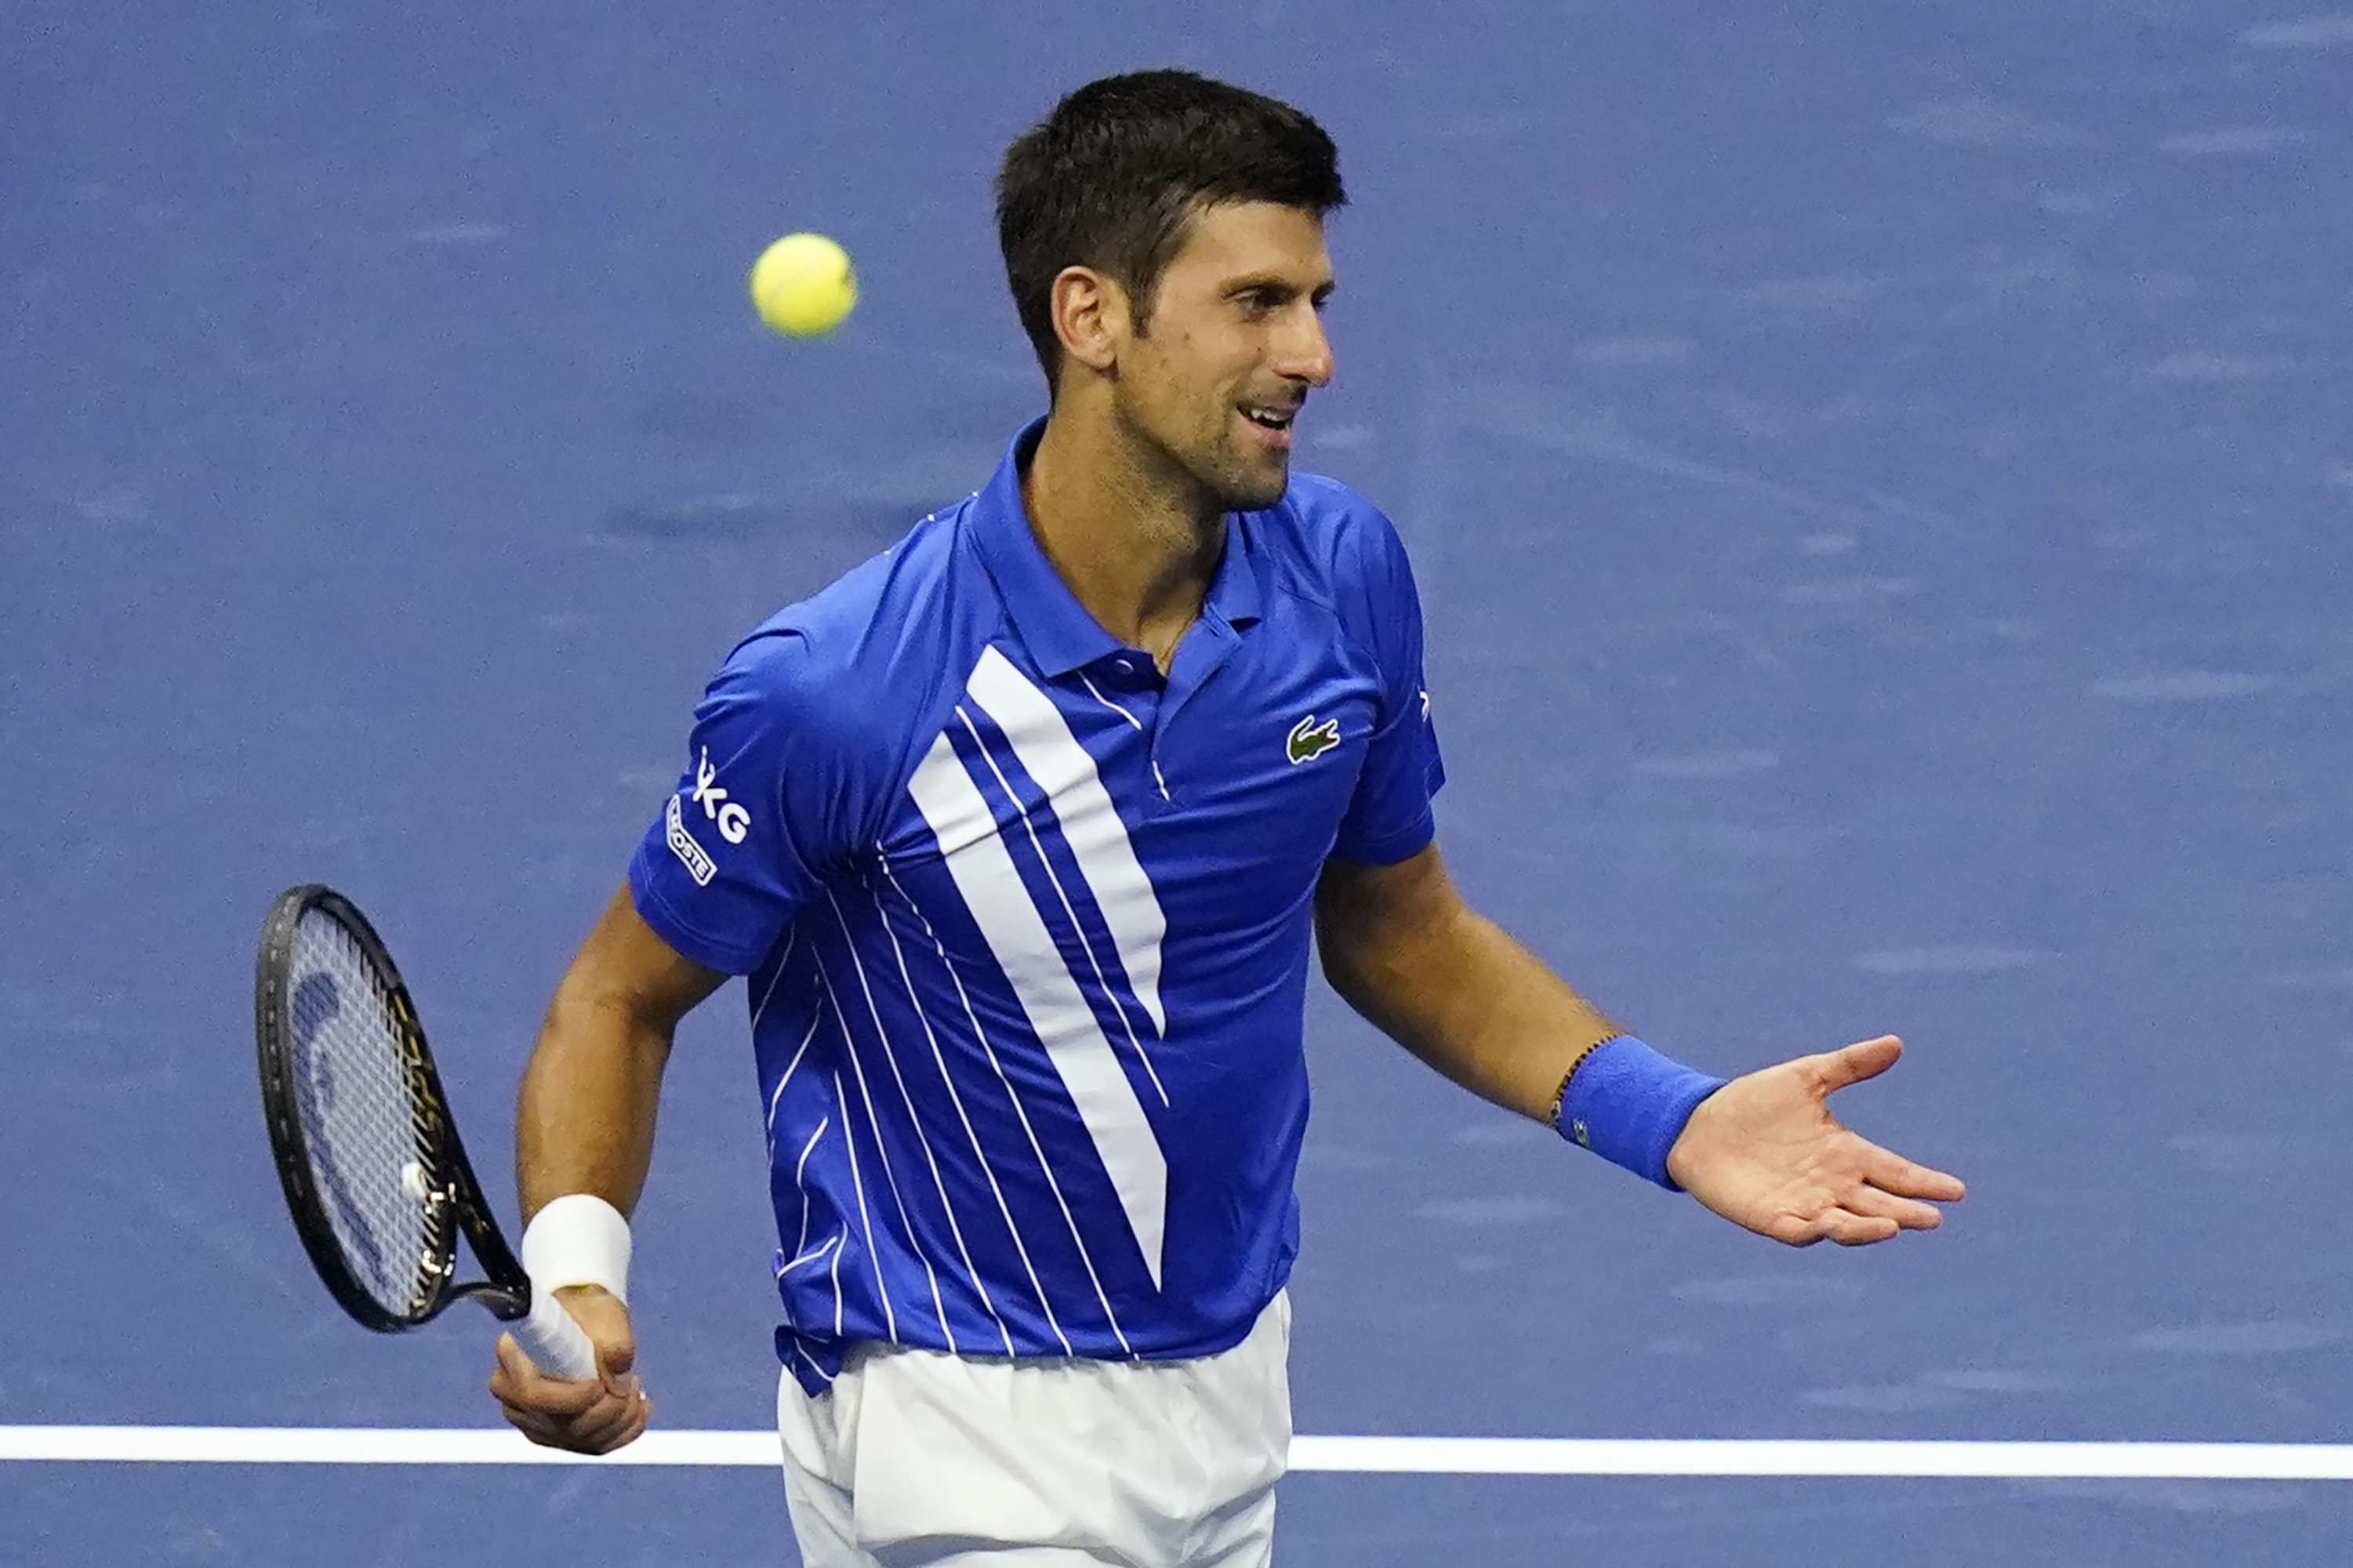 Novak Djokovic Dq D From 2020 Us Open Accidentally Hit Line Judge With Ball Bleacher Report Latest News Videos And Highlights